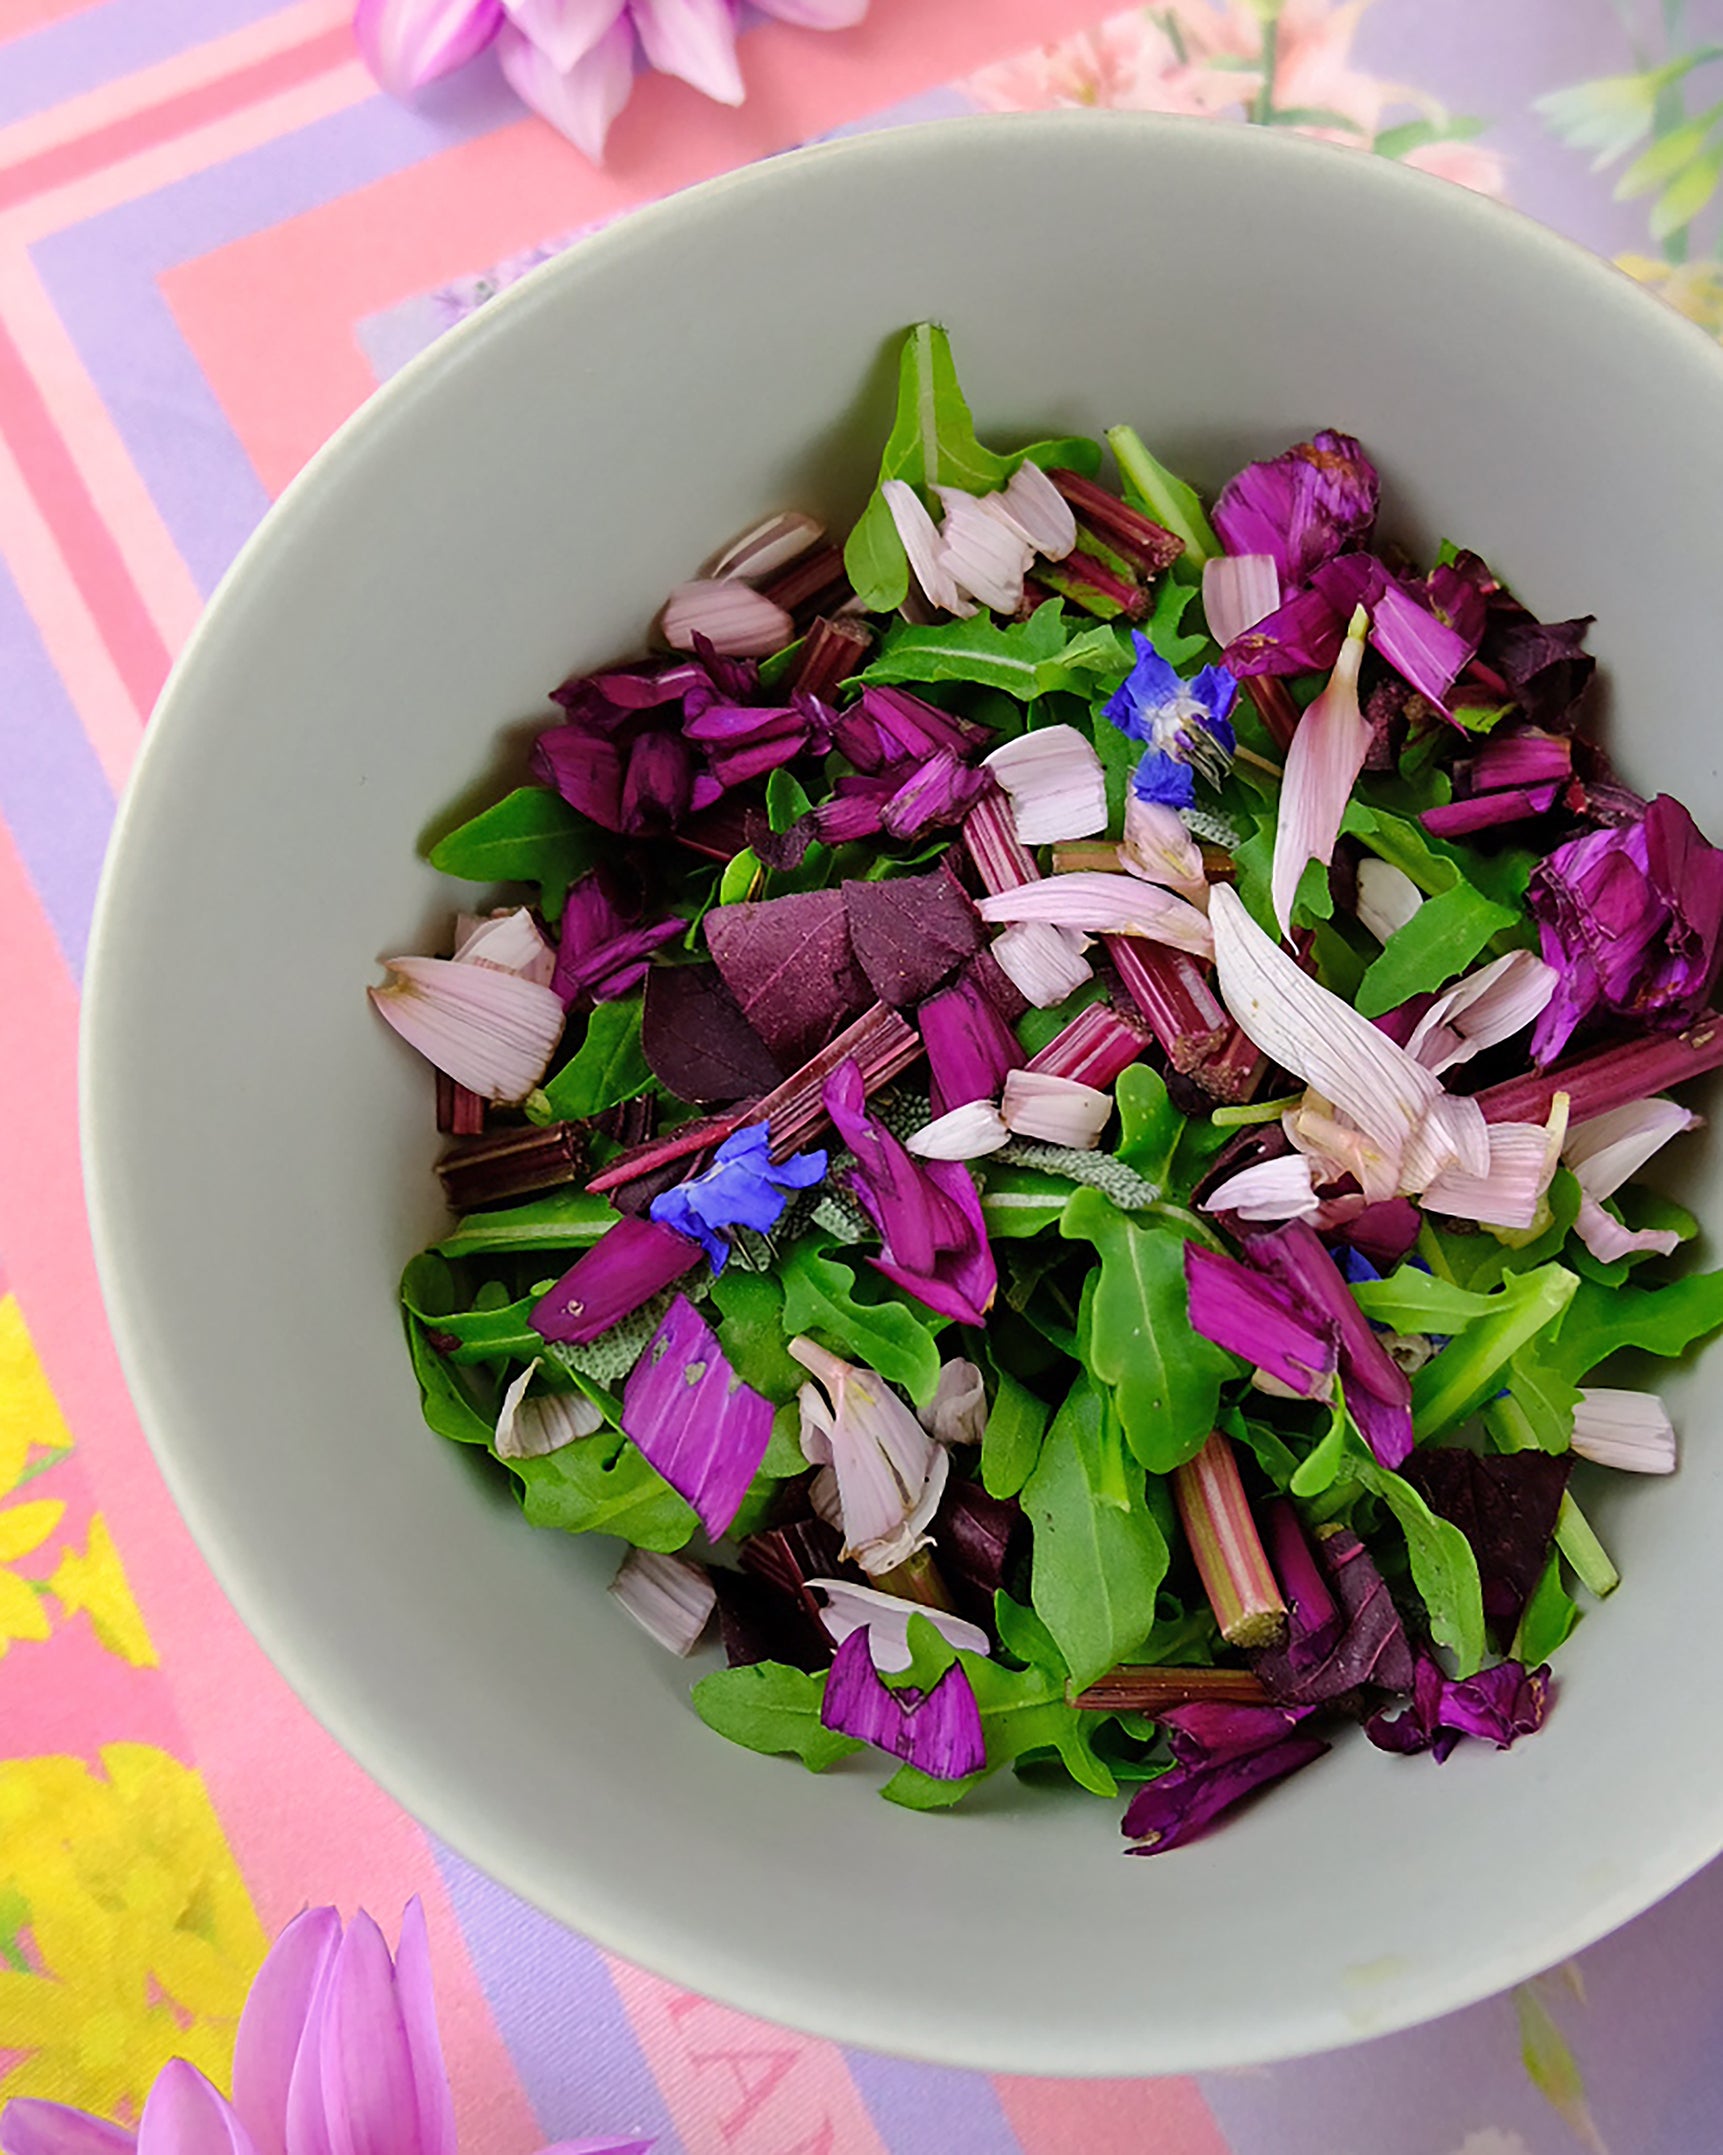 edible flowers, medicinal herbs and organic leaves to create a colourful healthy salad